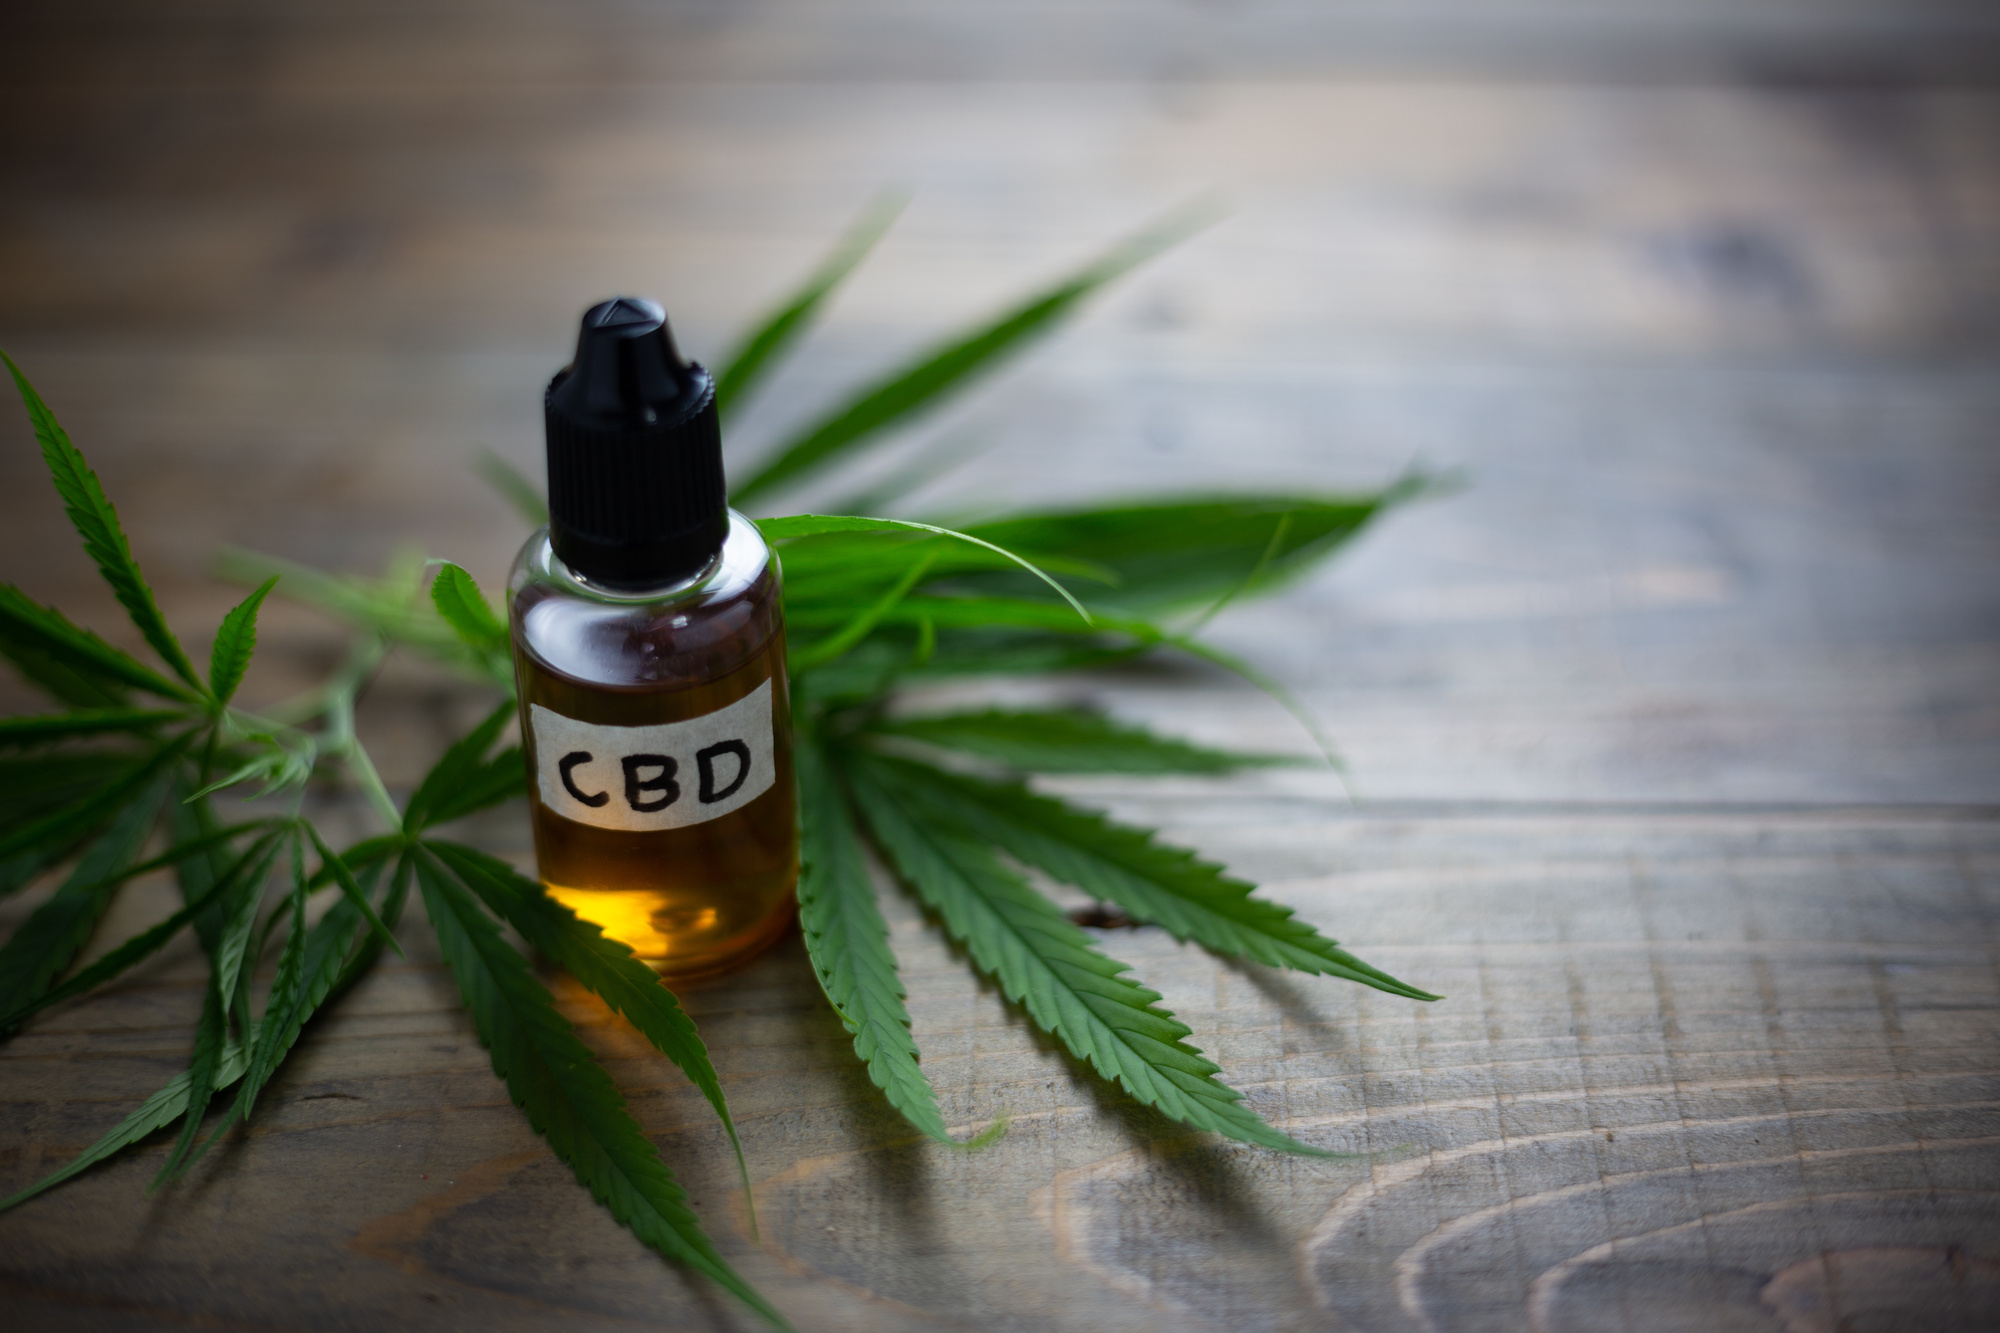 WHAT DOES "CBD" STAND FOR?